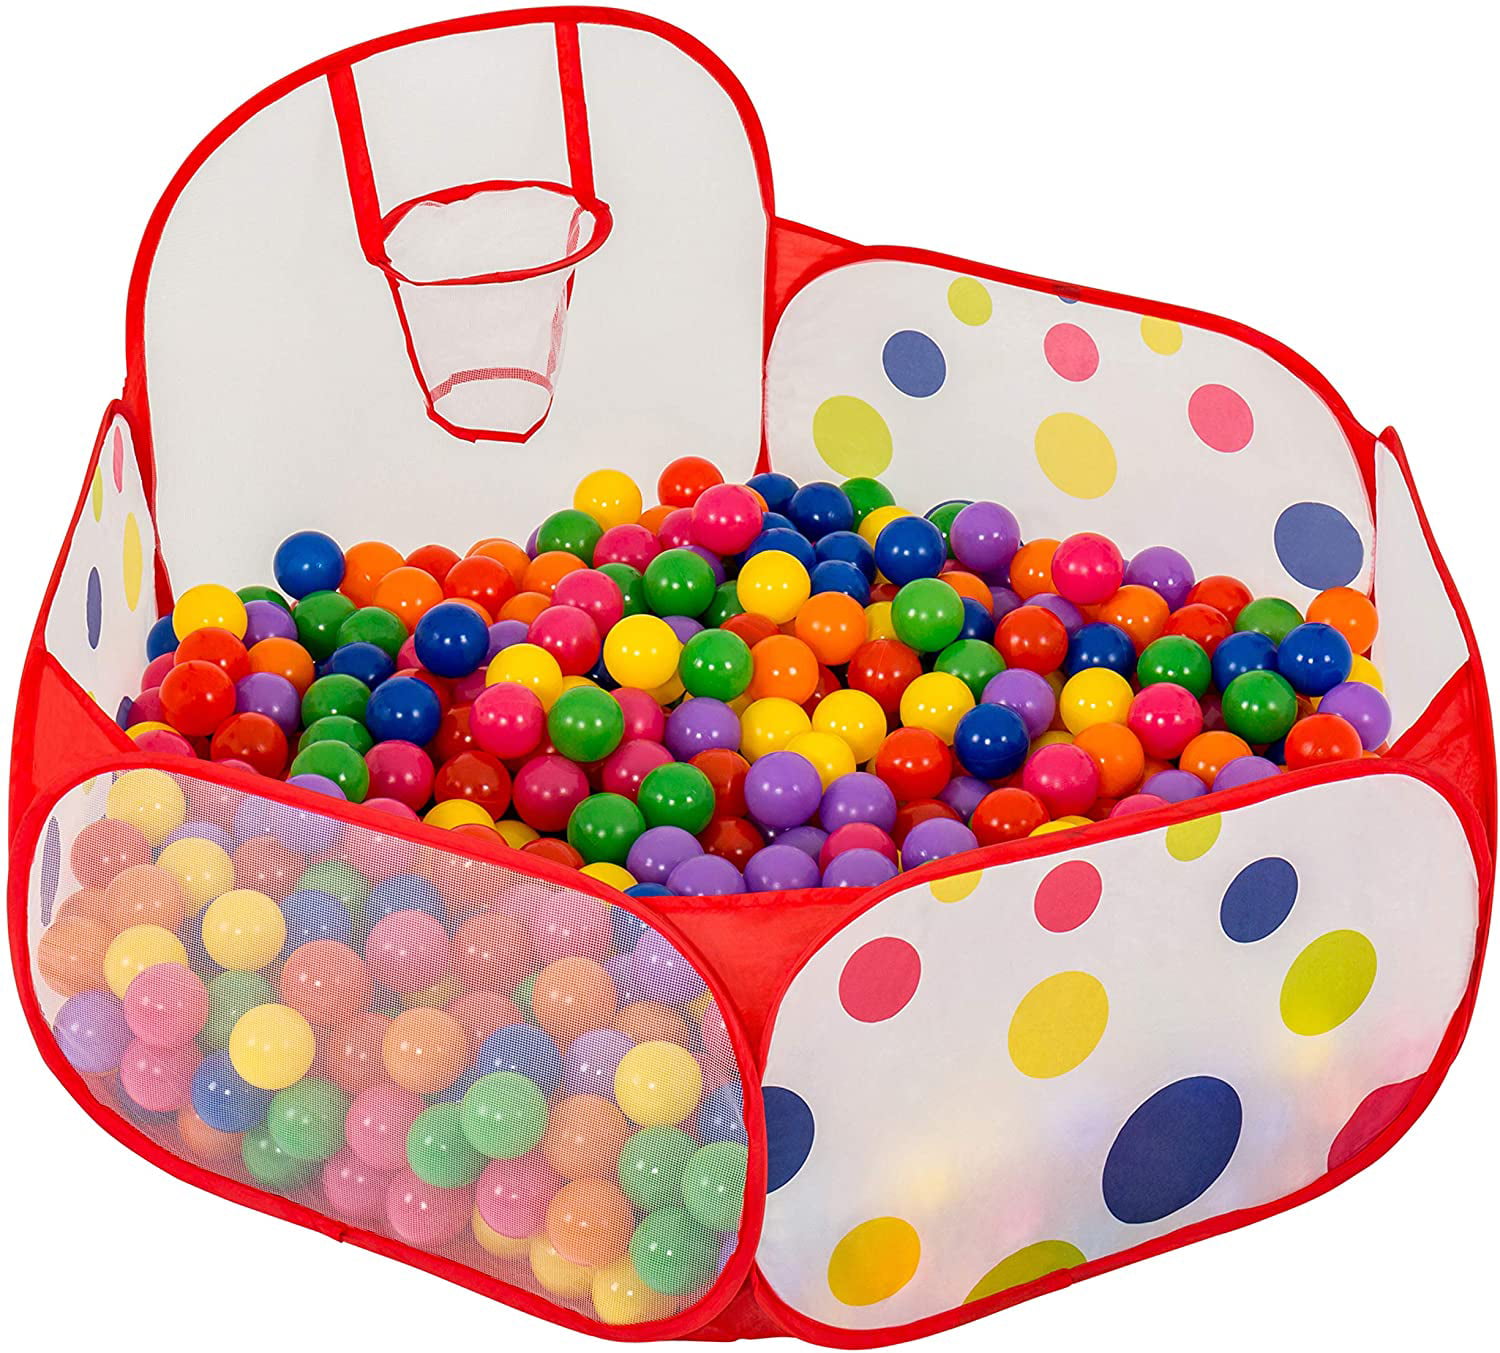 Portable Kids Baby Play Tent Foldable Ball Pit Playhouse Playpen Ocean Ball Pool 